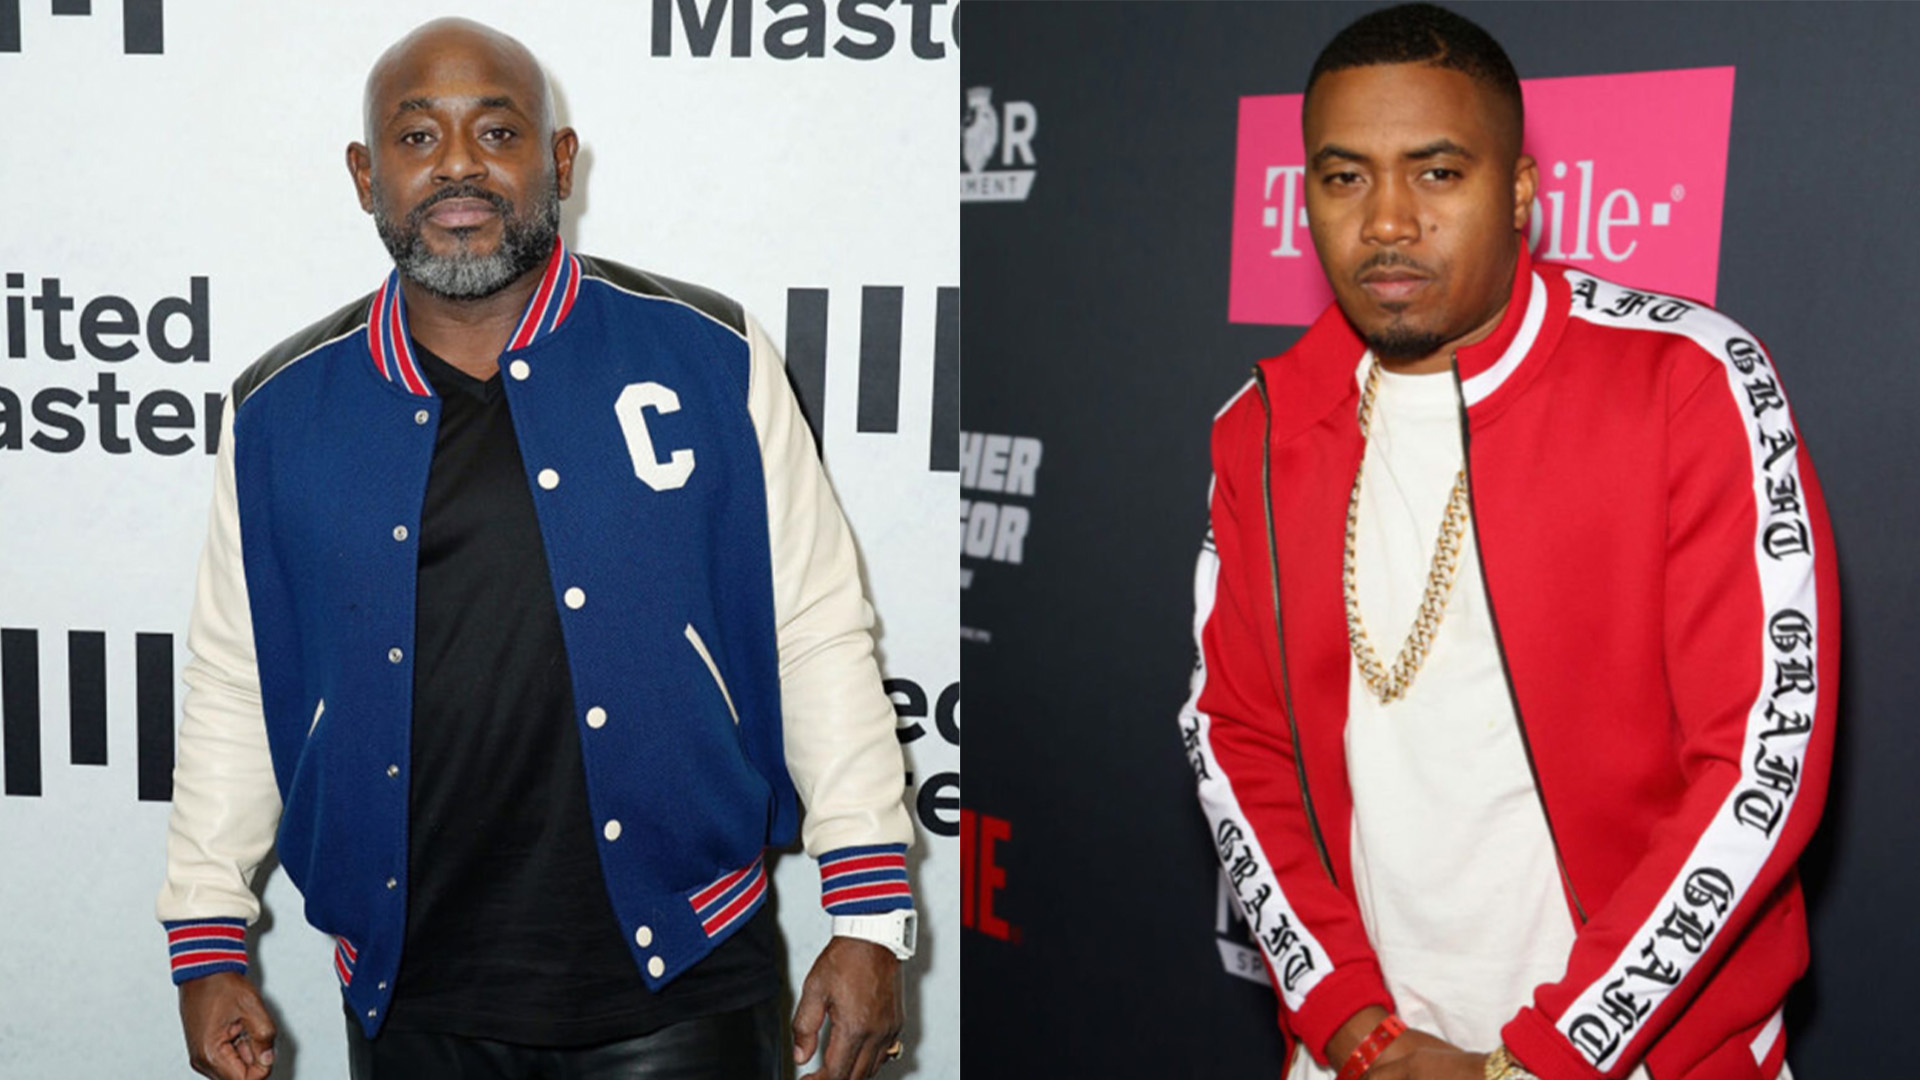 Nas, Steve Stoute, Ben Horowitz, And More Join To Award $500K To Hip-Hop 'Contributors Who Didn’t Get What They Deserved'